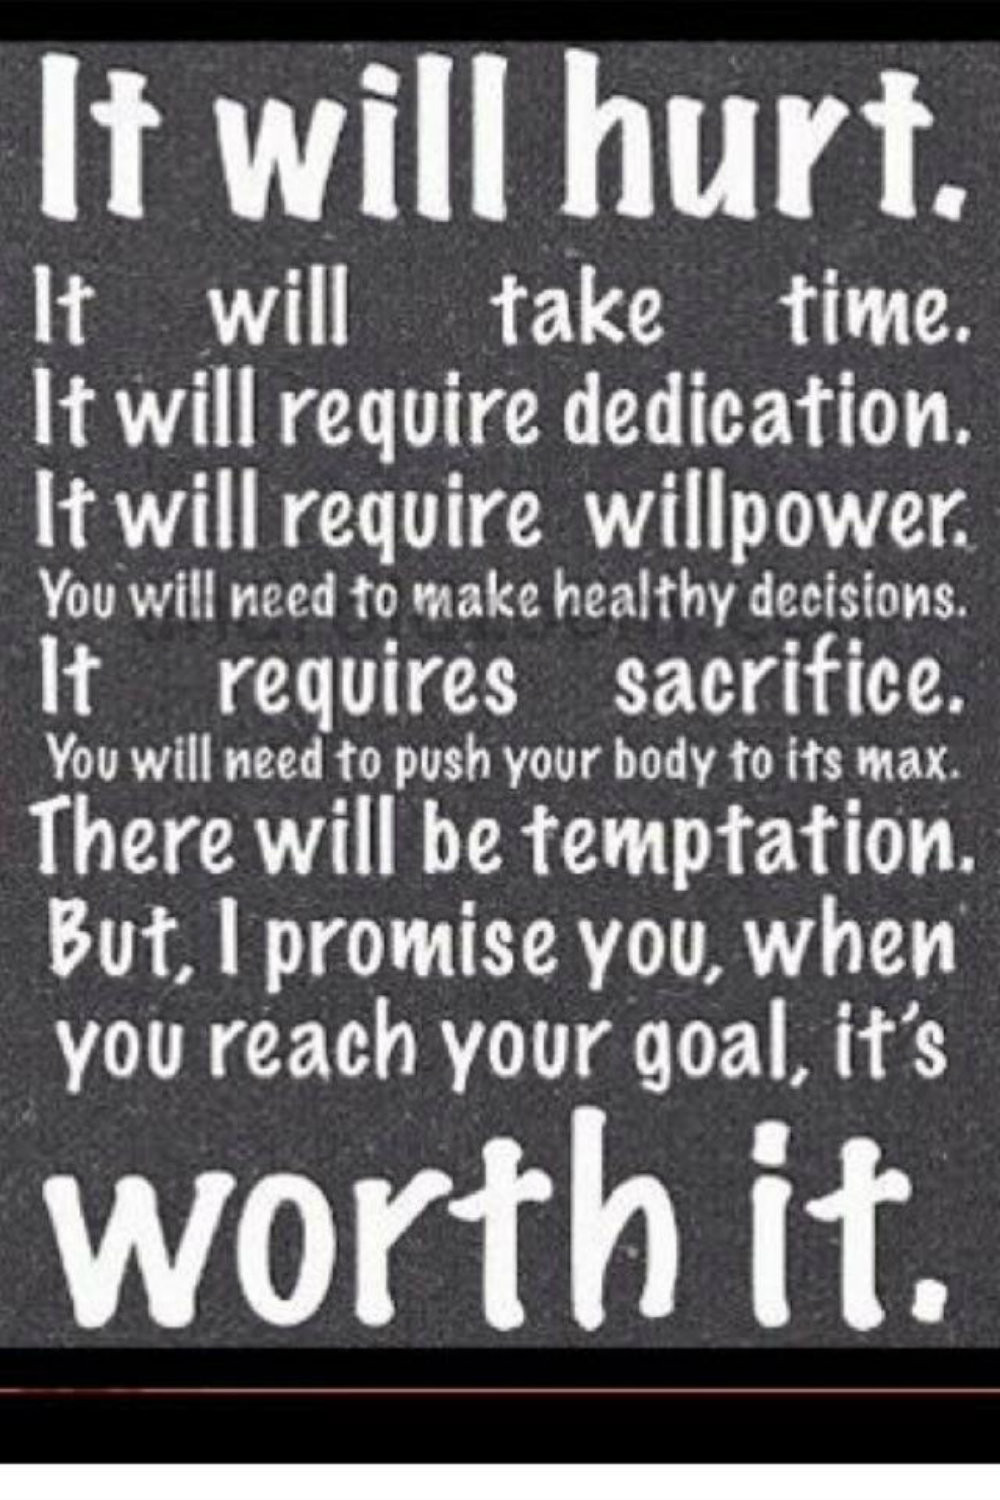 Motivational Quotes For Weight Loss
 Weight Loss Motivational Quotes QuotesGram